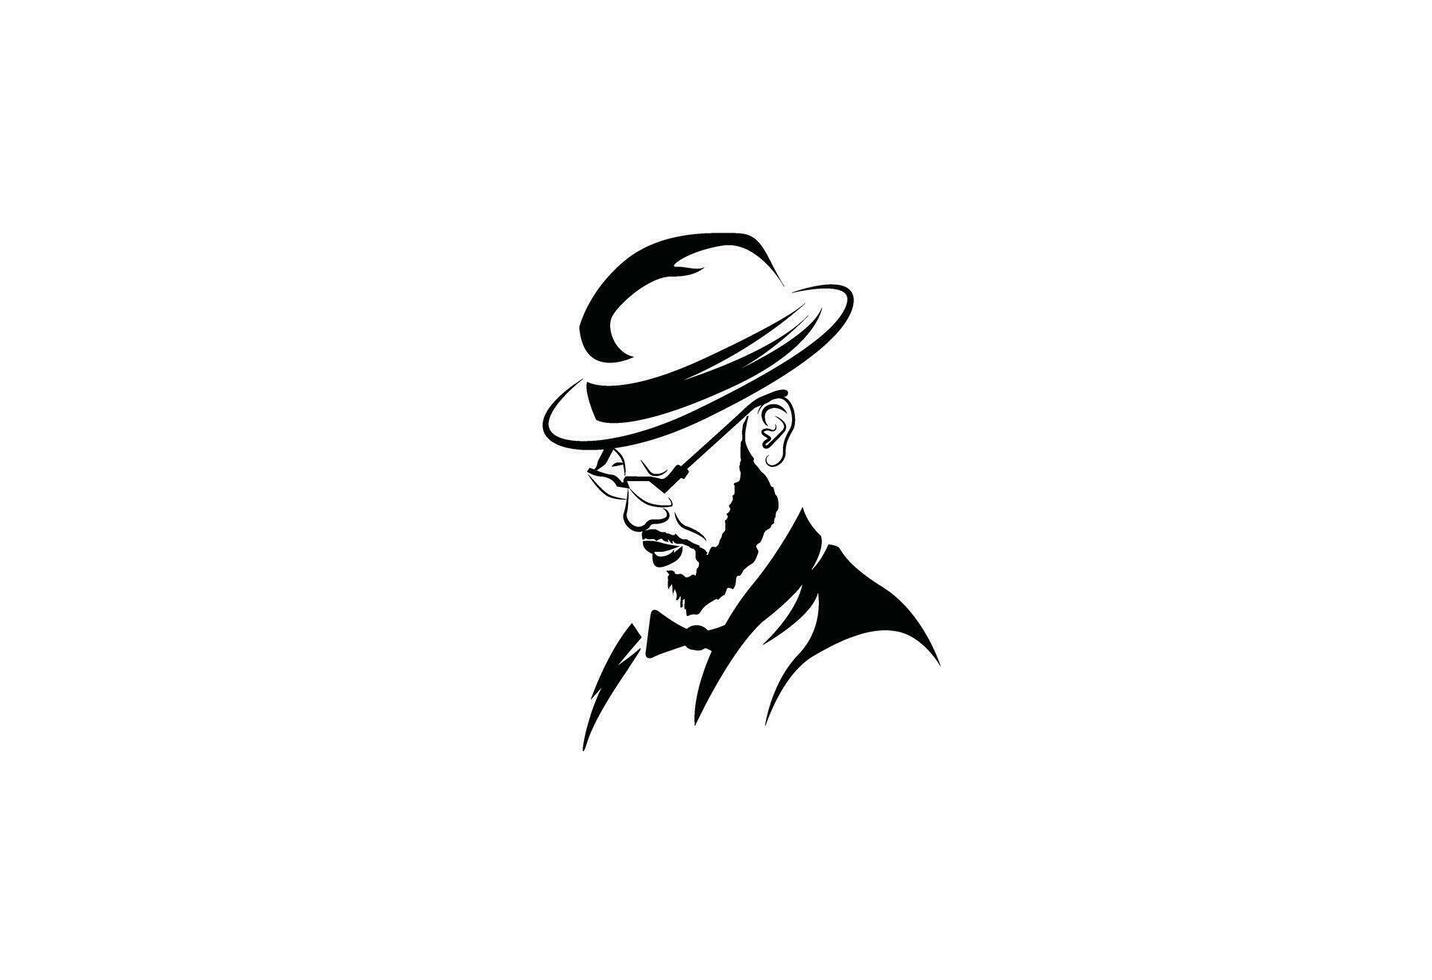 Cool hipster man character with sunglass and hat vector